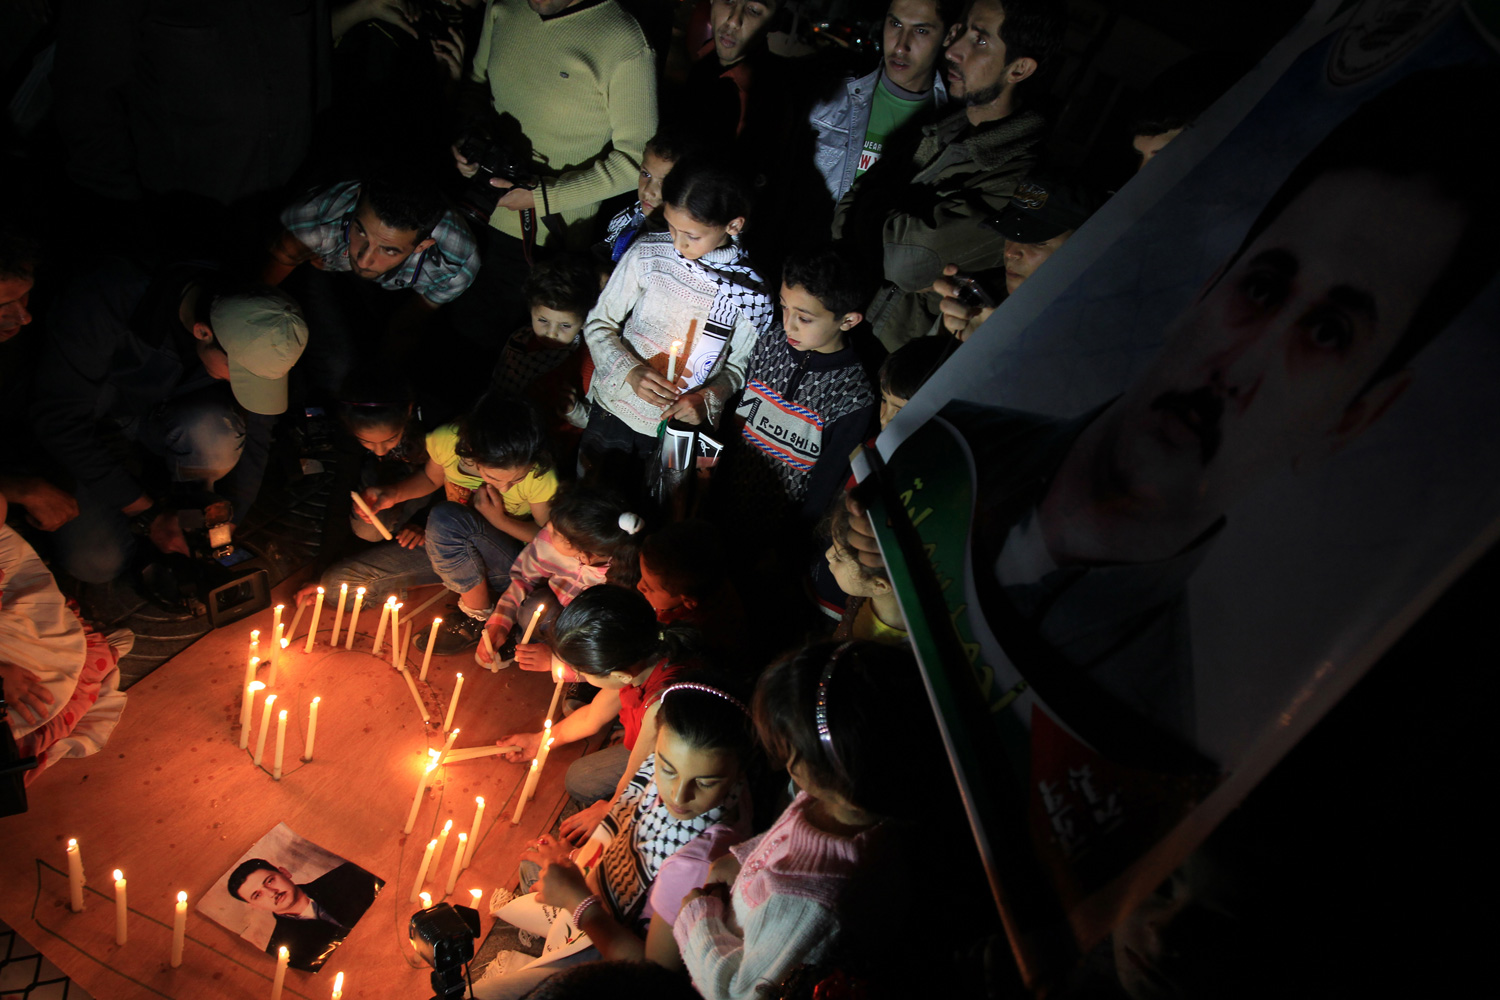 April 28, 2012. Palestinian children place candles on the ground during an evening demonstration in Gaza City calling for the release of Palestinians being held in Israeli jails.